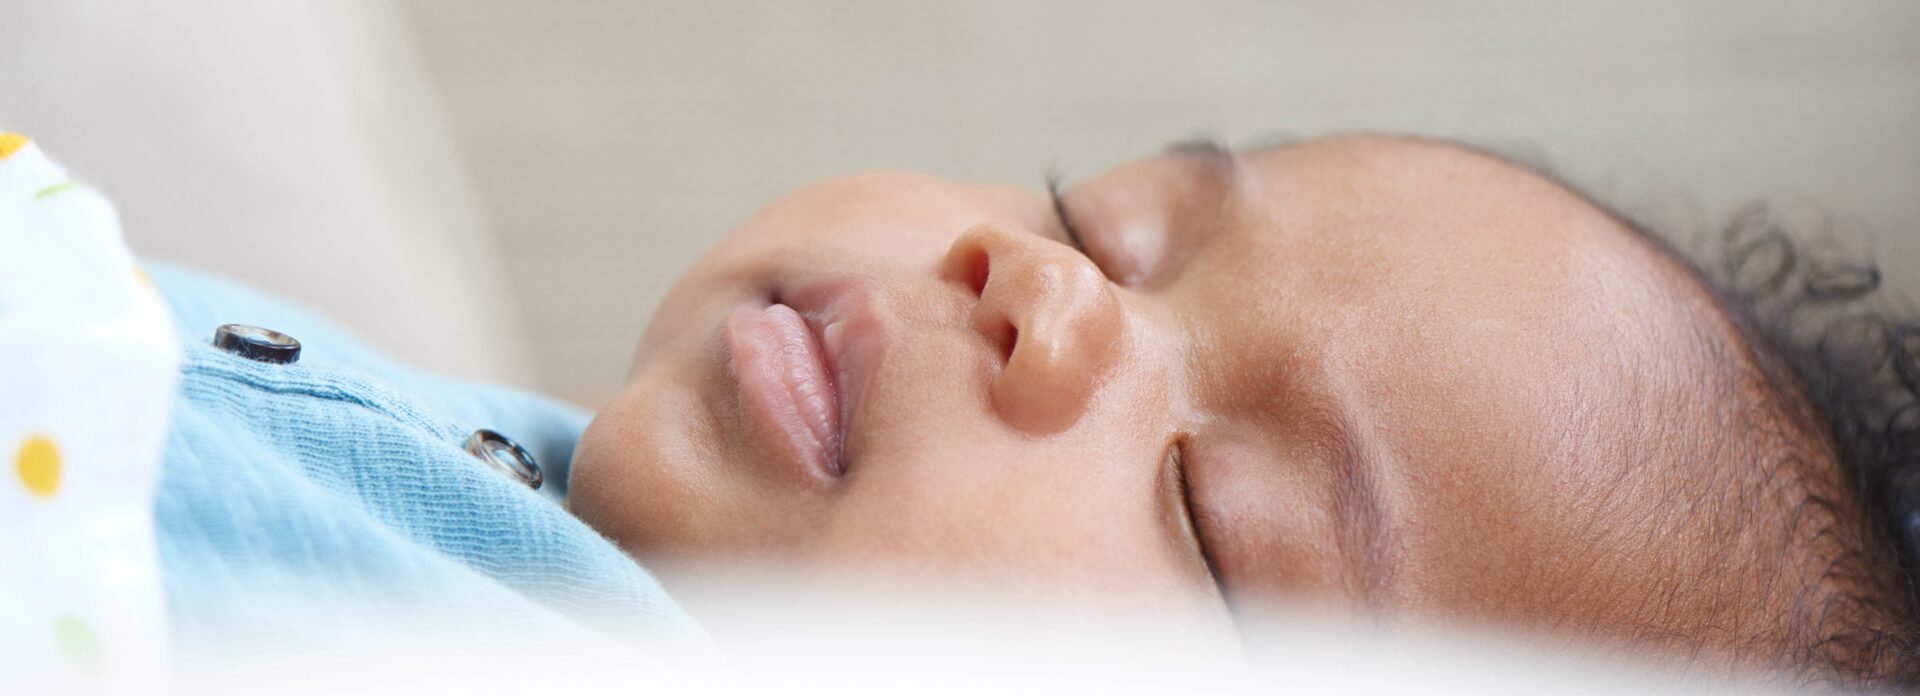 A close-up of a sleeping baby.